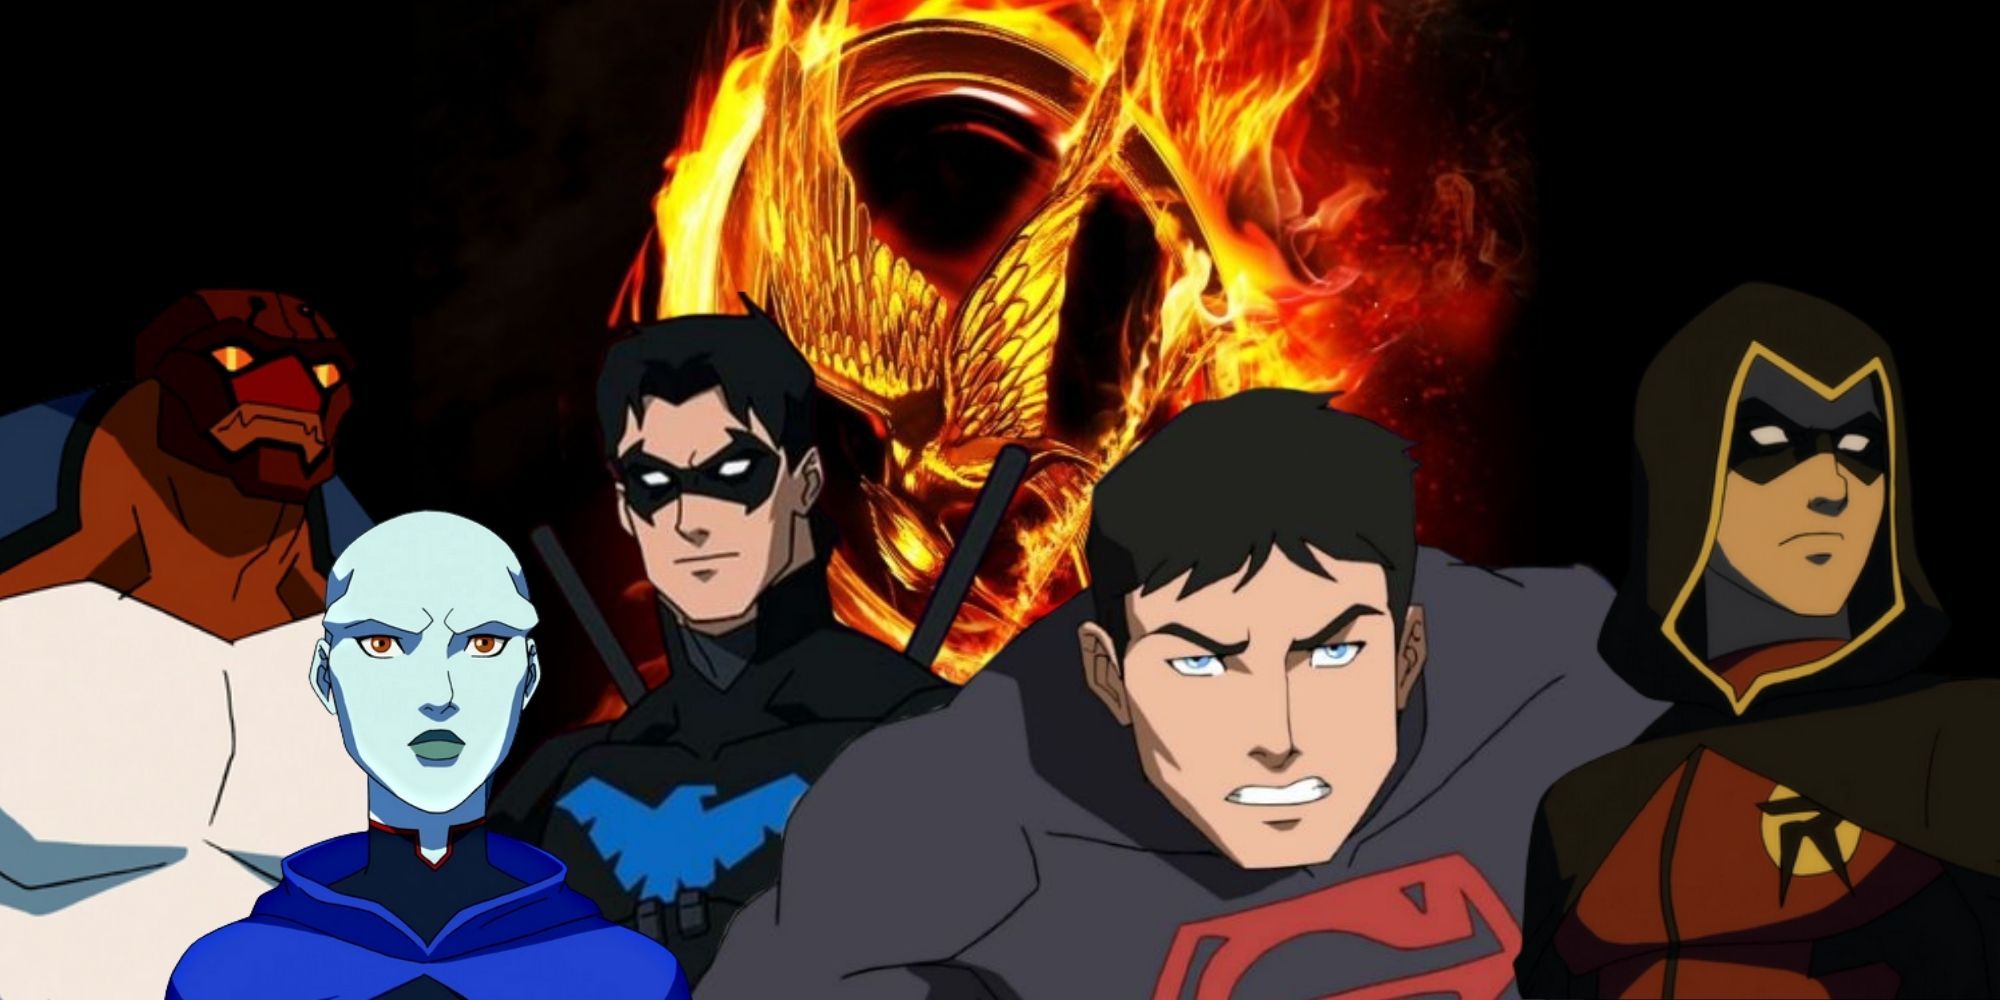 Split image showing the characters from Young Justice against a Hunger Games mockingjay backdrop